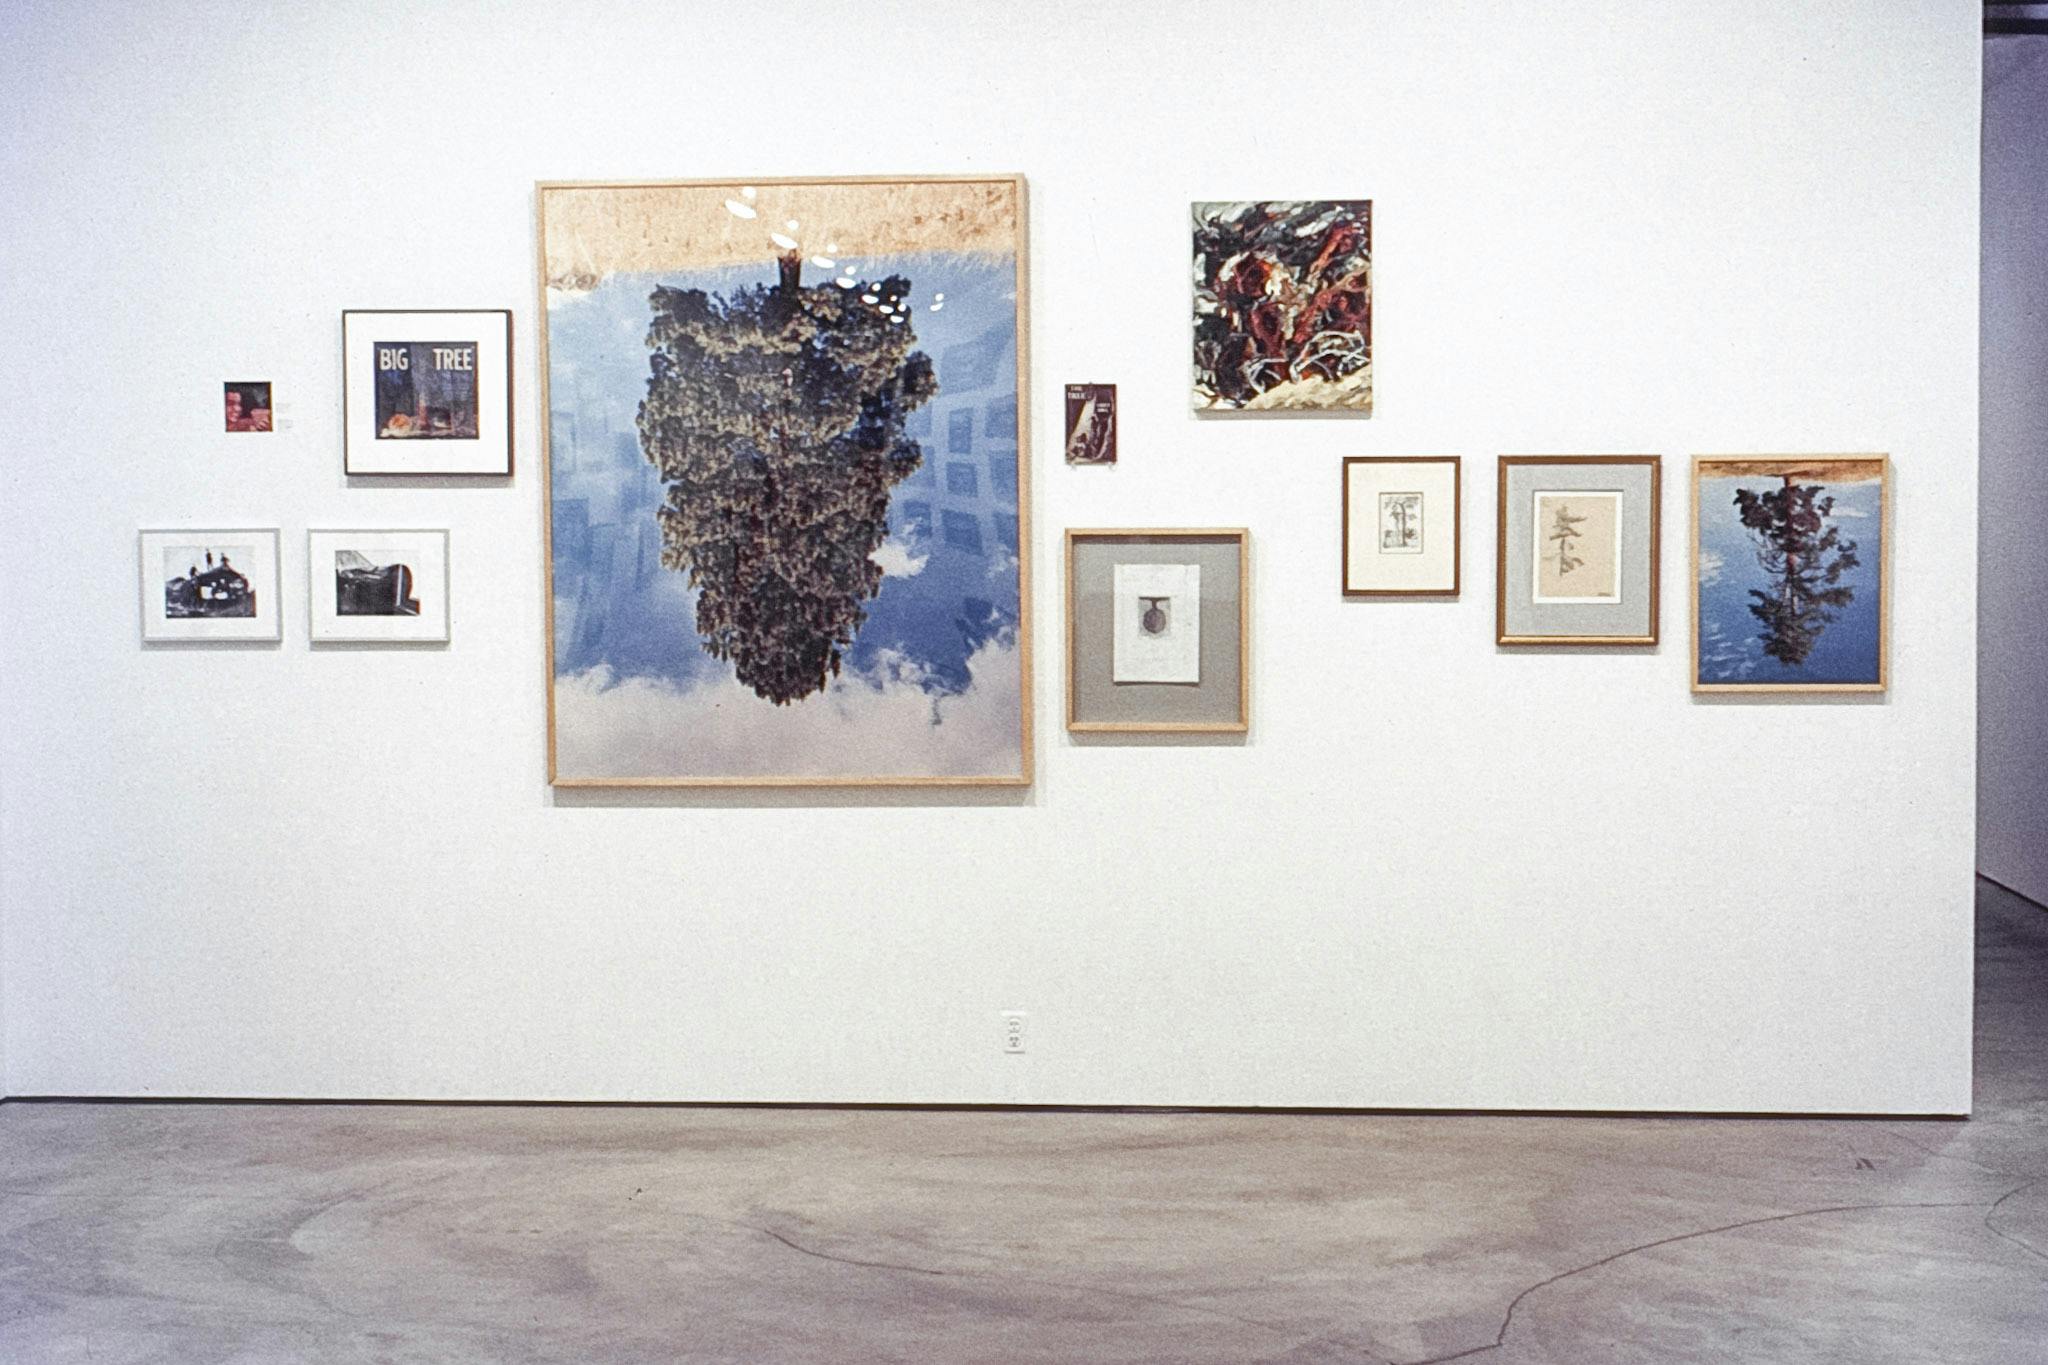 11 works mounted on a white wall. The works are placed asymmetrically, many of them in wood frames. One work reads "Big Tree." Beside it, there is a large photo of an upside-down tree and a blue sky.